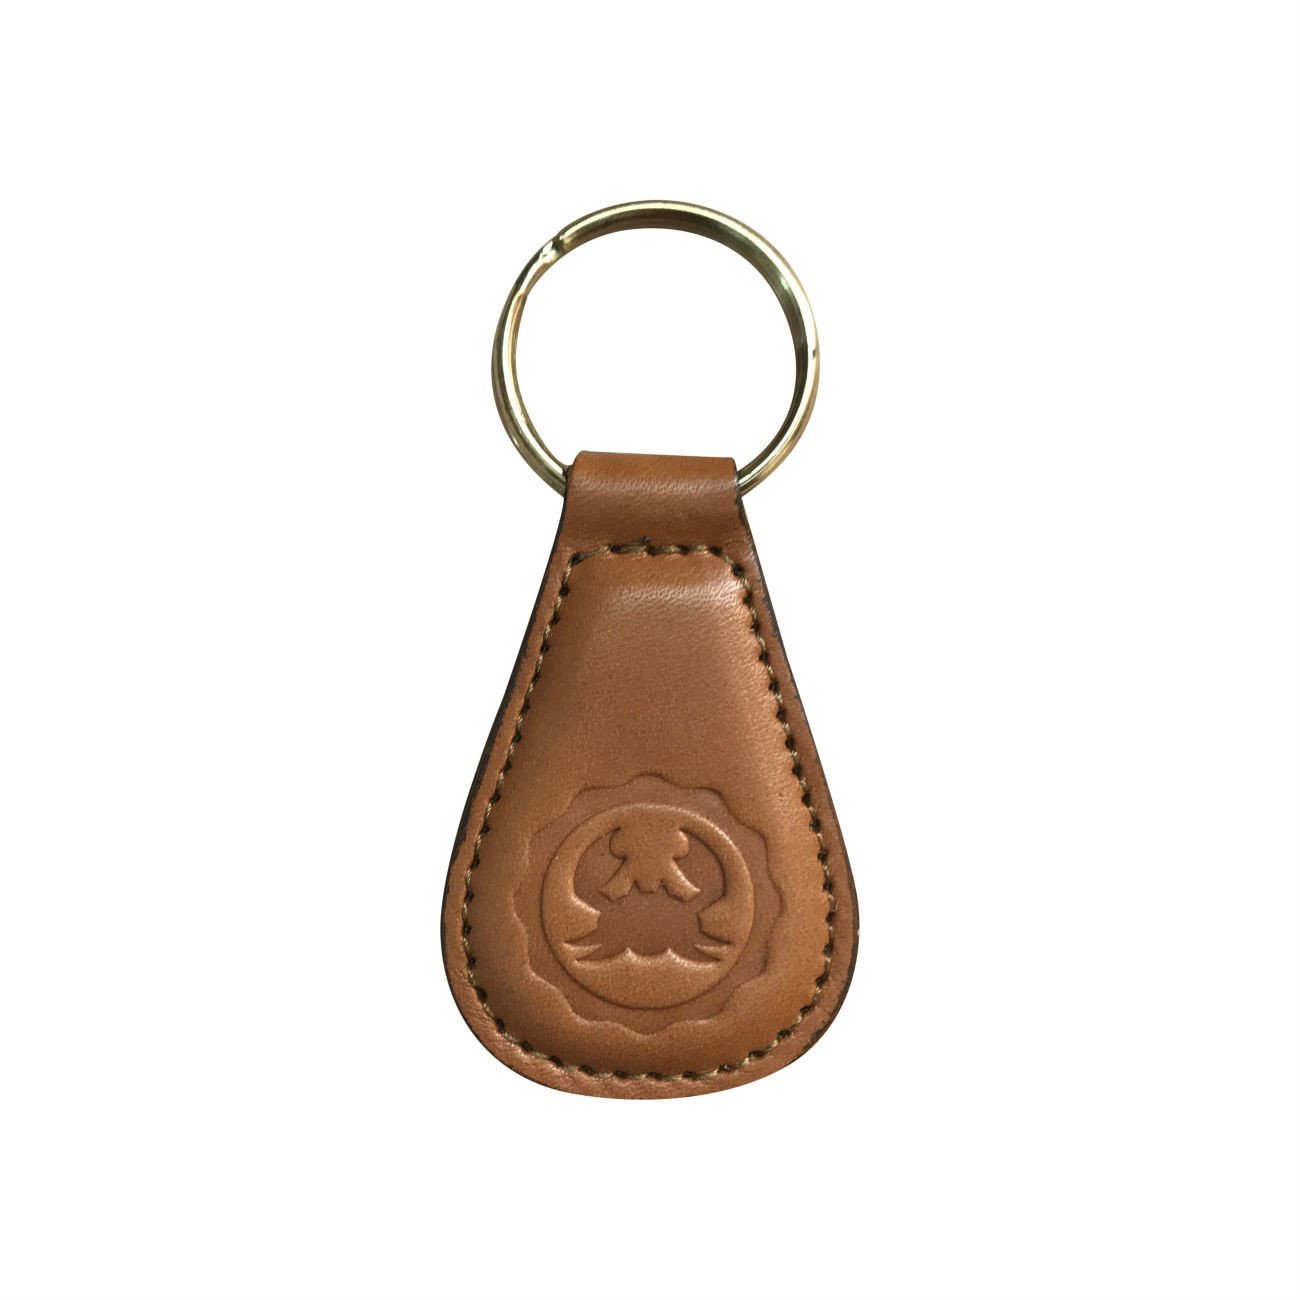 JanCars Accessories Luvly Luxury Brand Keychain Brown mg